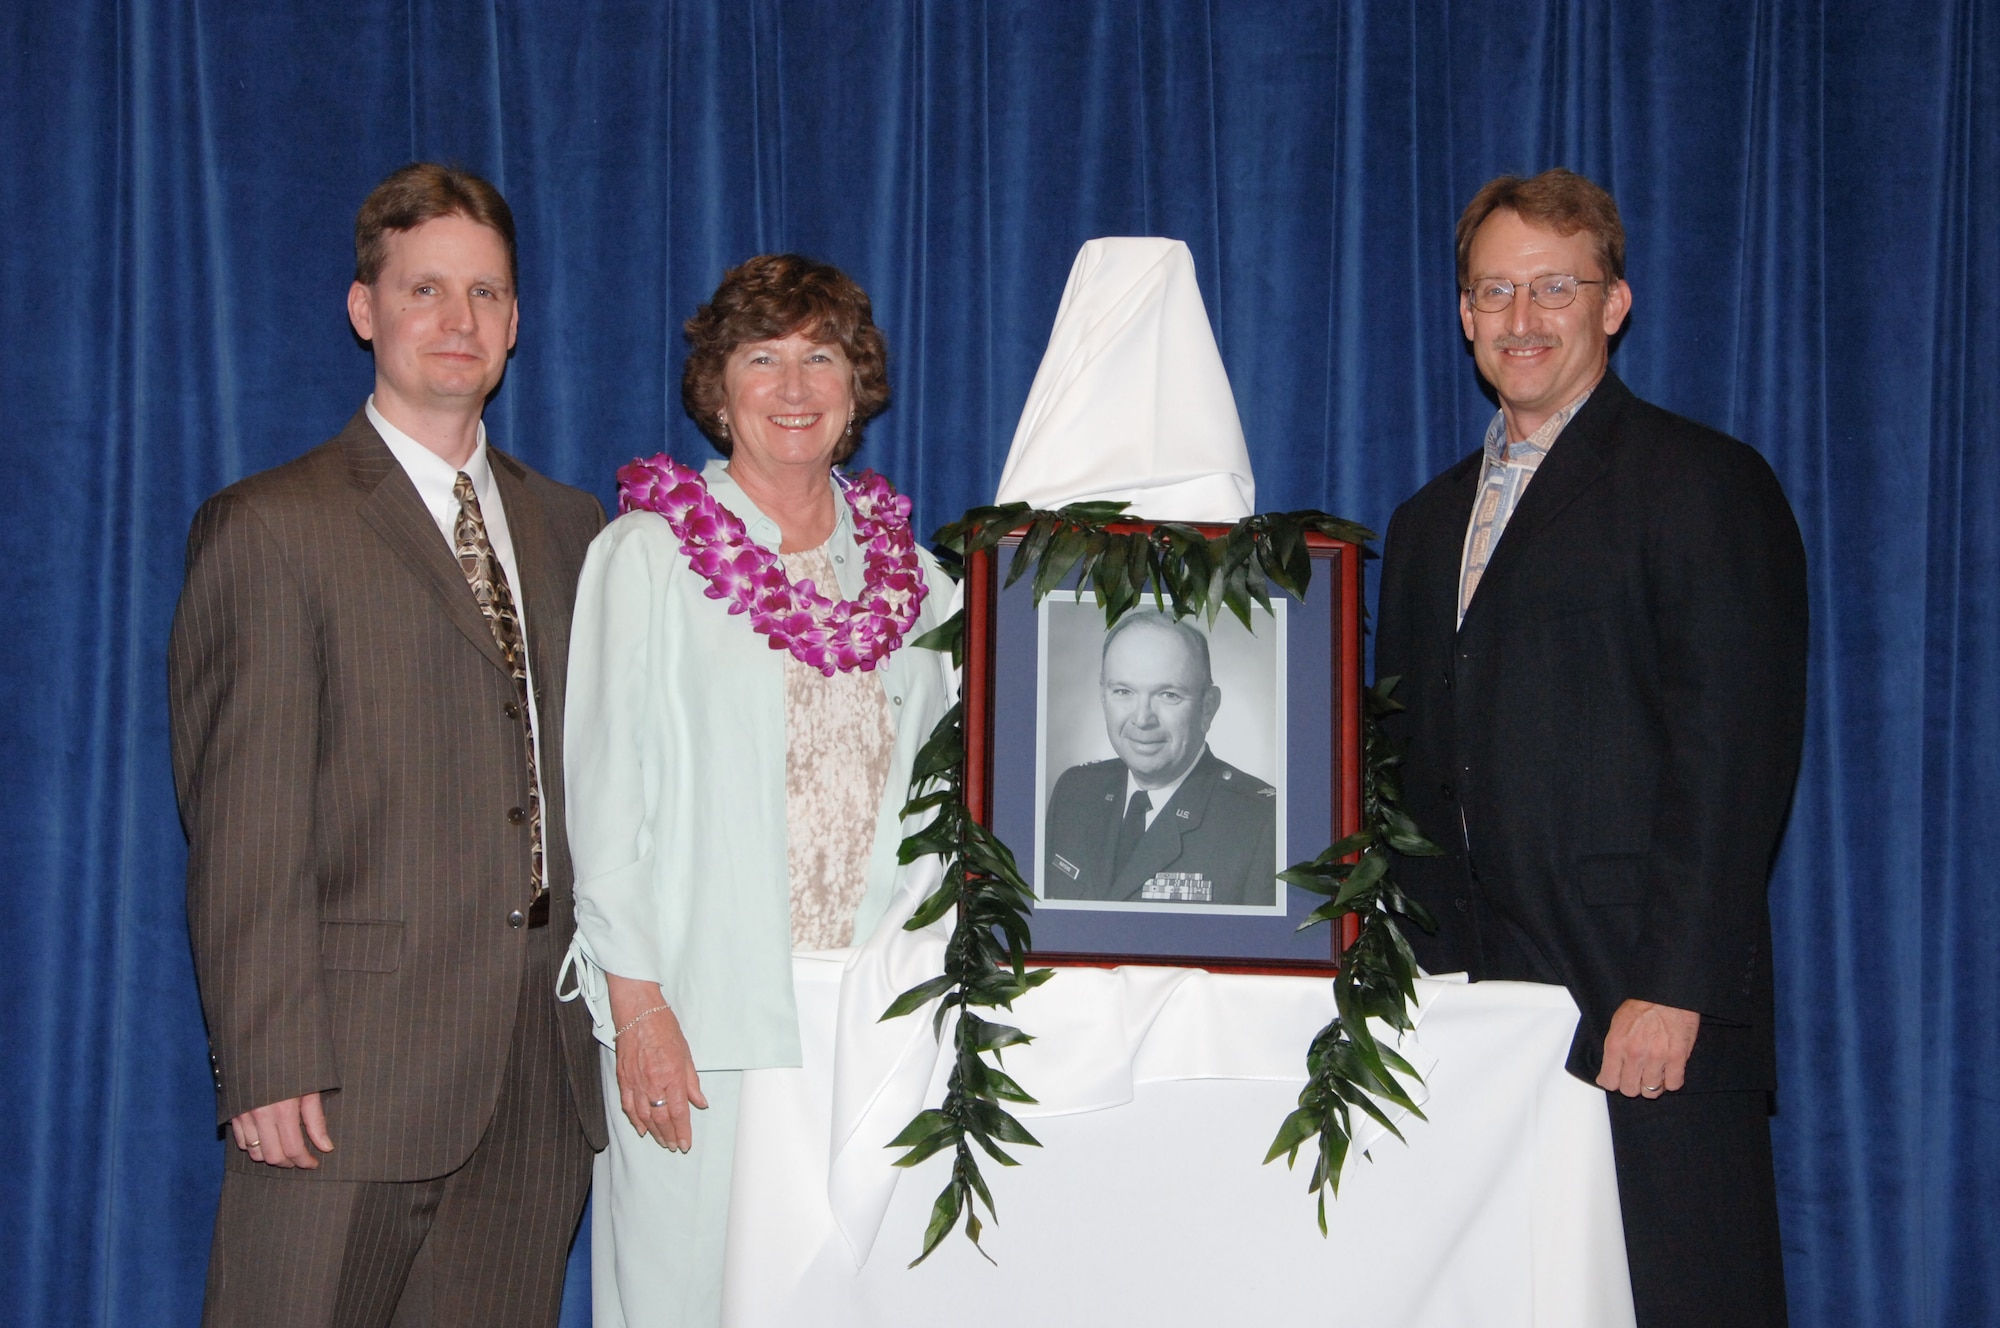 Mrs. Joyce Kaysing stands beside a portrait of her spouse, retired Col. Charles "Chuck" Kaysing, during a ceremony April 17 as the auditorium at the Defense Financial Management and Comptroller School was dedicated in his honor. Colonel Kaysing, who died in 2006, was a former commandant of the school. Also shown are sons Keith and Kevin Kaysing. (U.S. Air Force photo by Melanie Rodgers Cox)